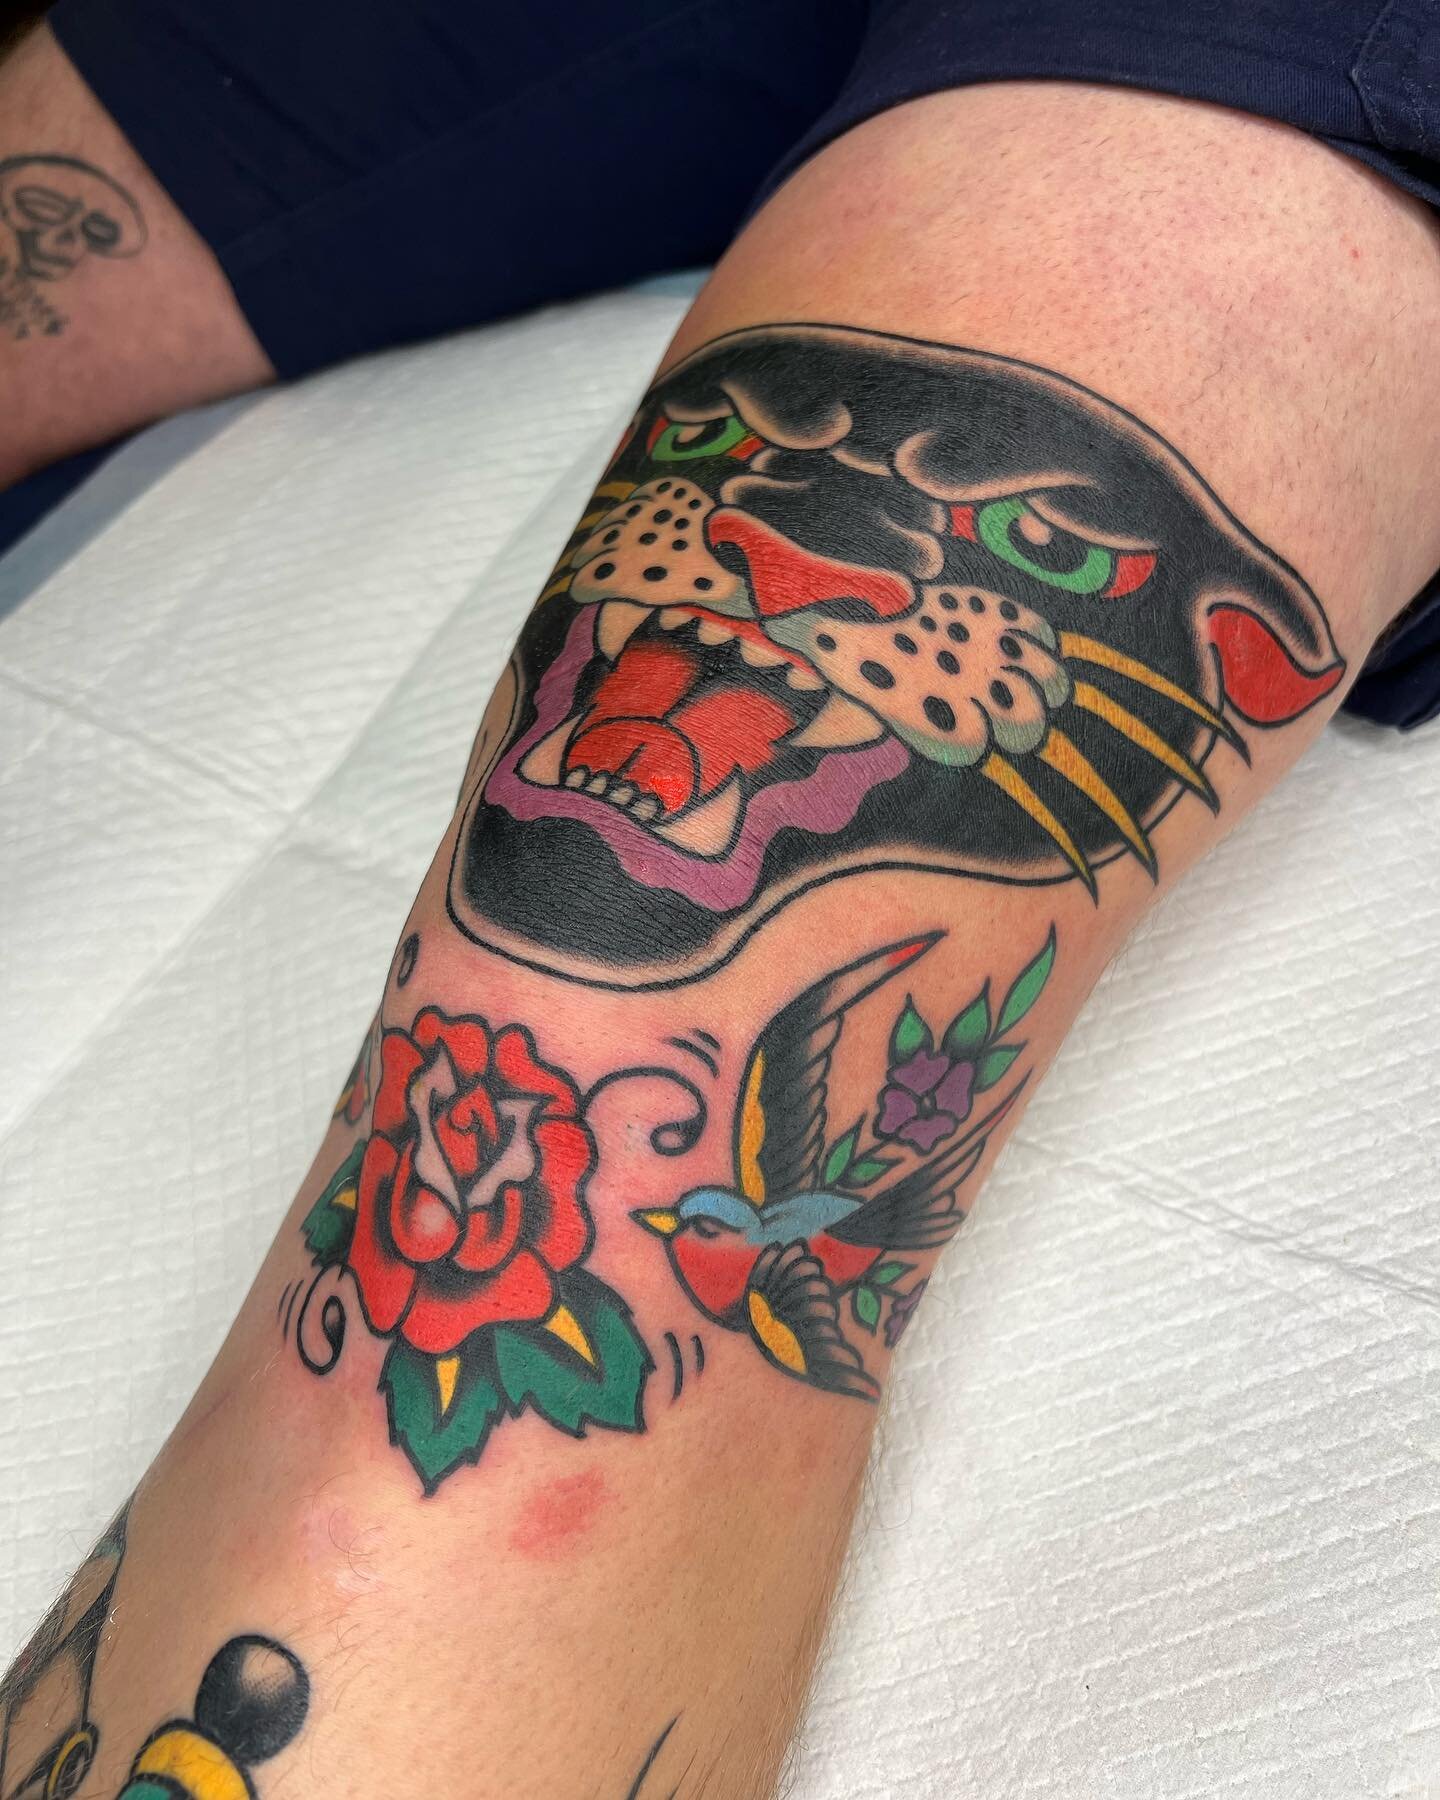 couldn&rsquo;t get a great photo of this one, had heaps of fun with some drawn on filler too. Thanks Brodie for all your effort over the last few days 🙏🏼
(Panther done on Tuesday)